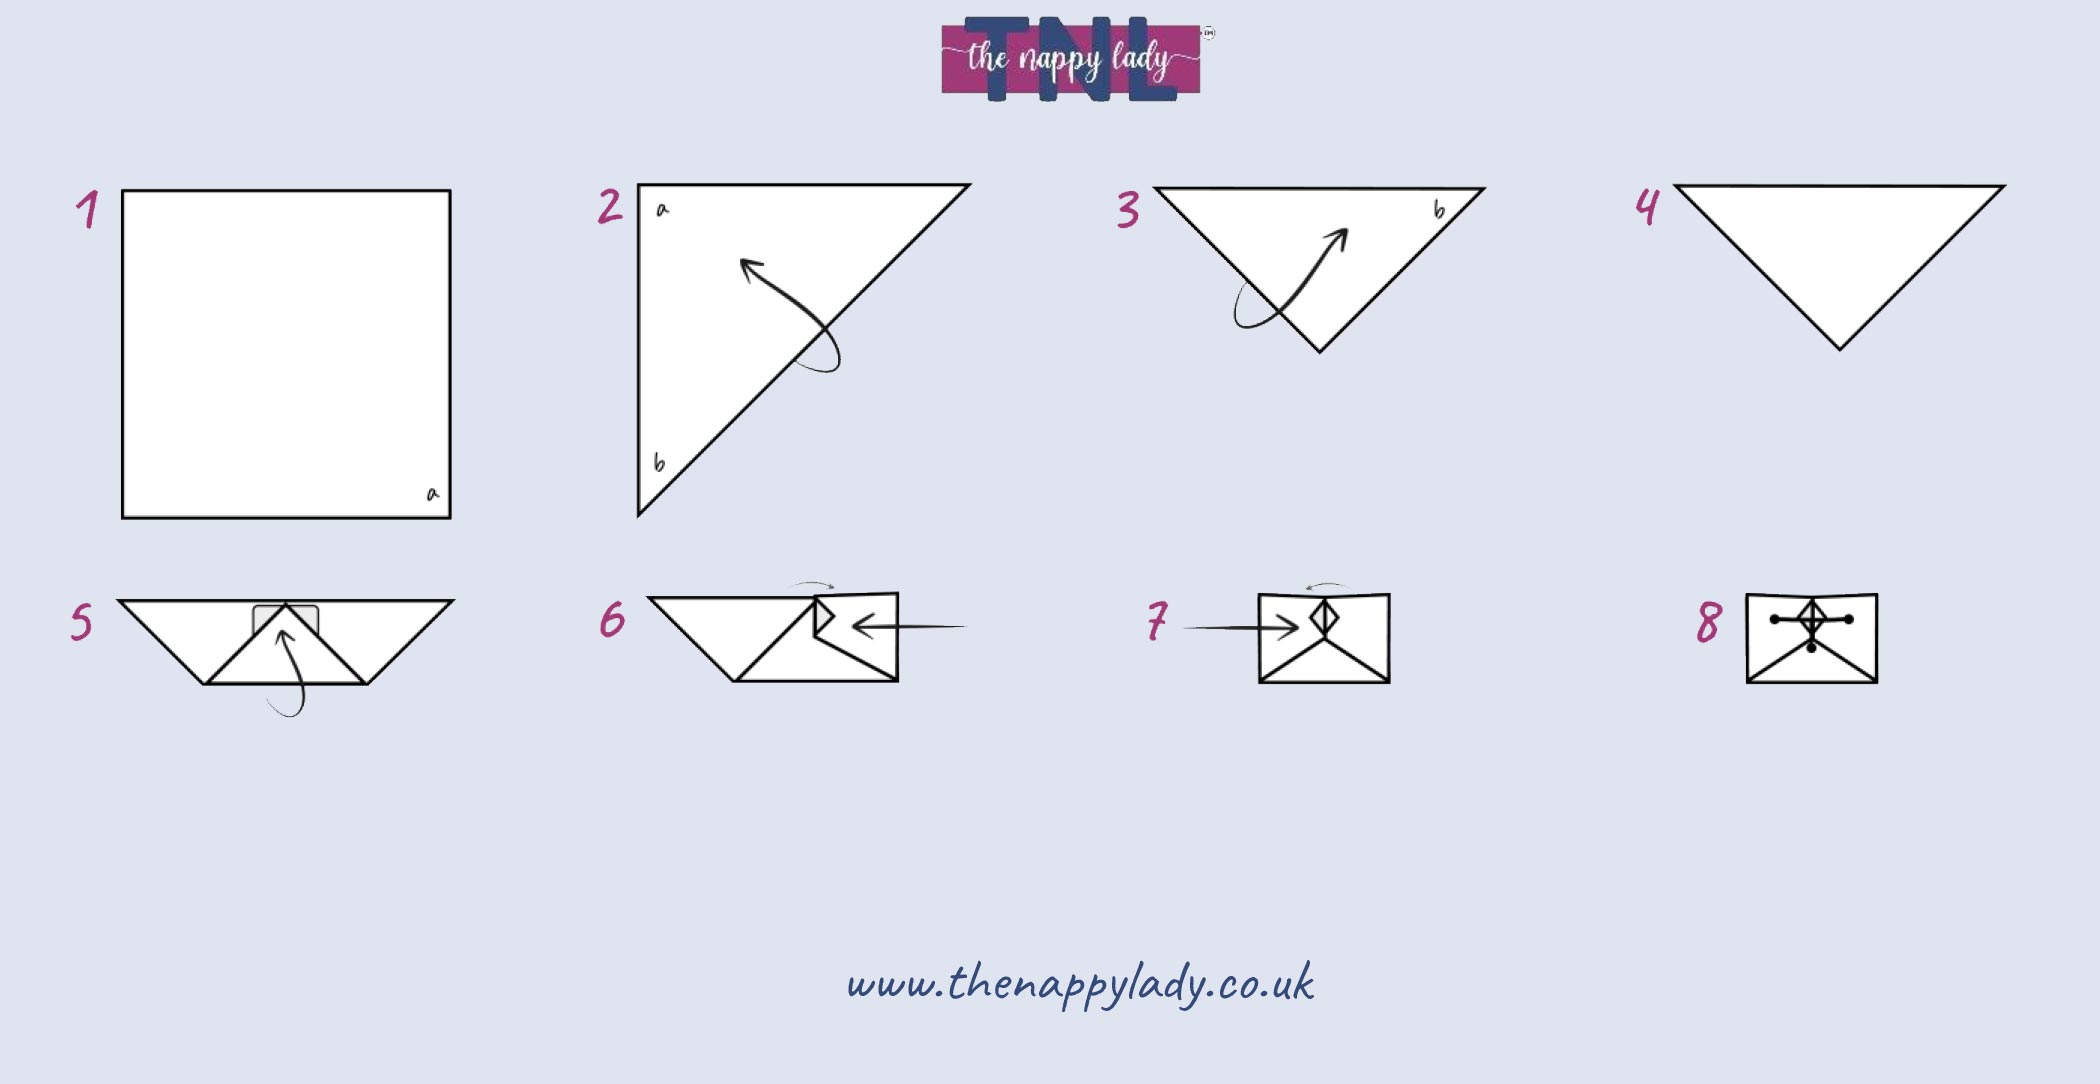 folding guide for the lyndseys terry nappy fold